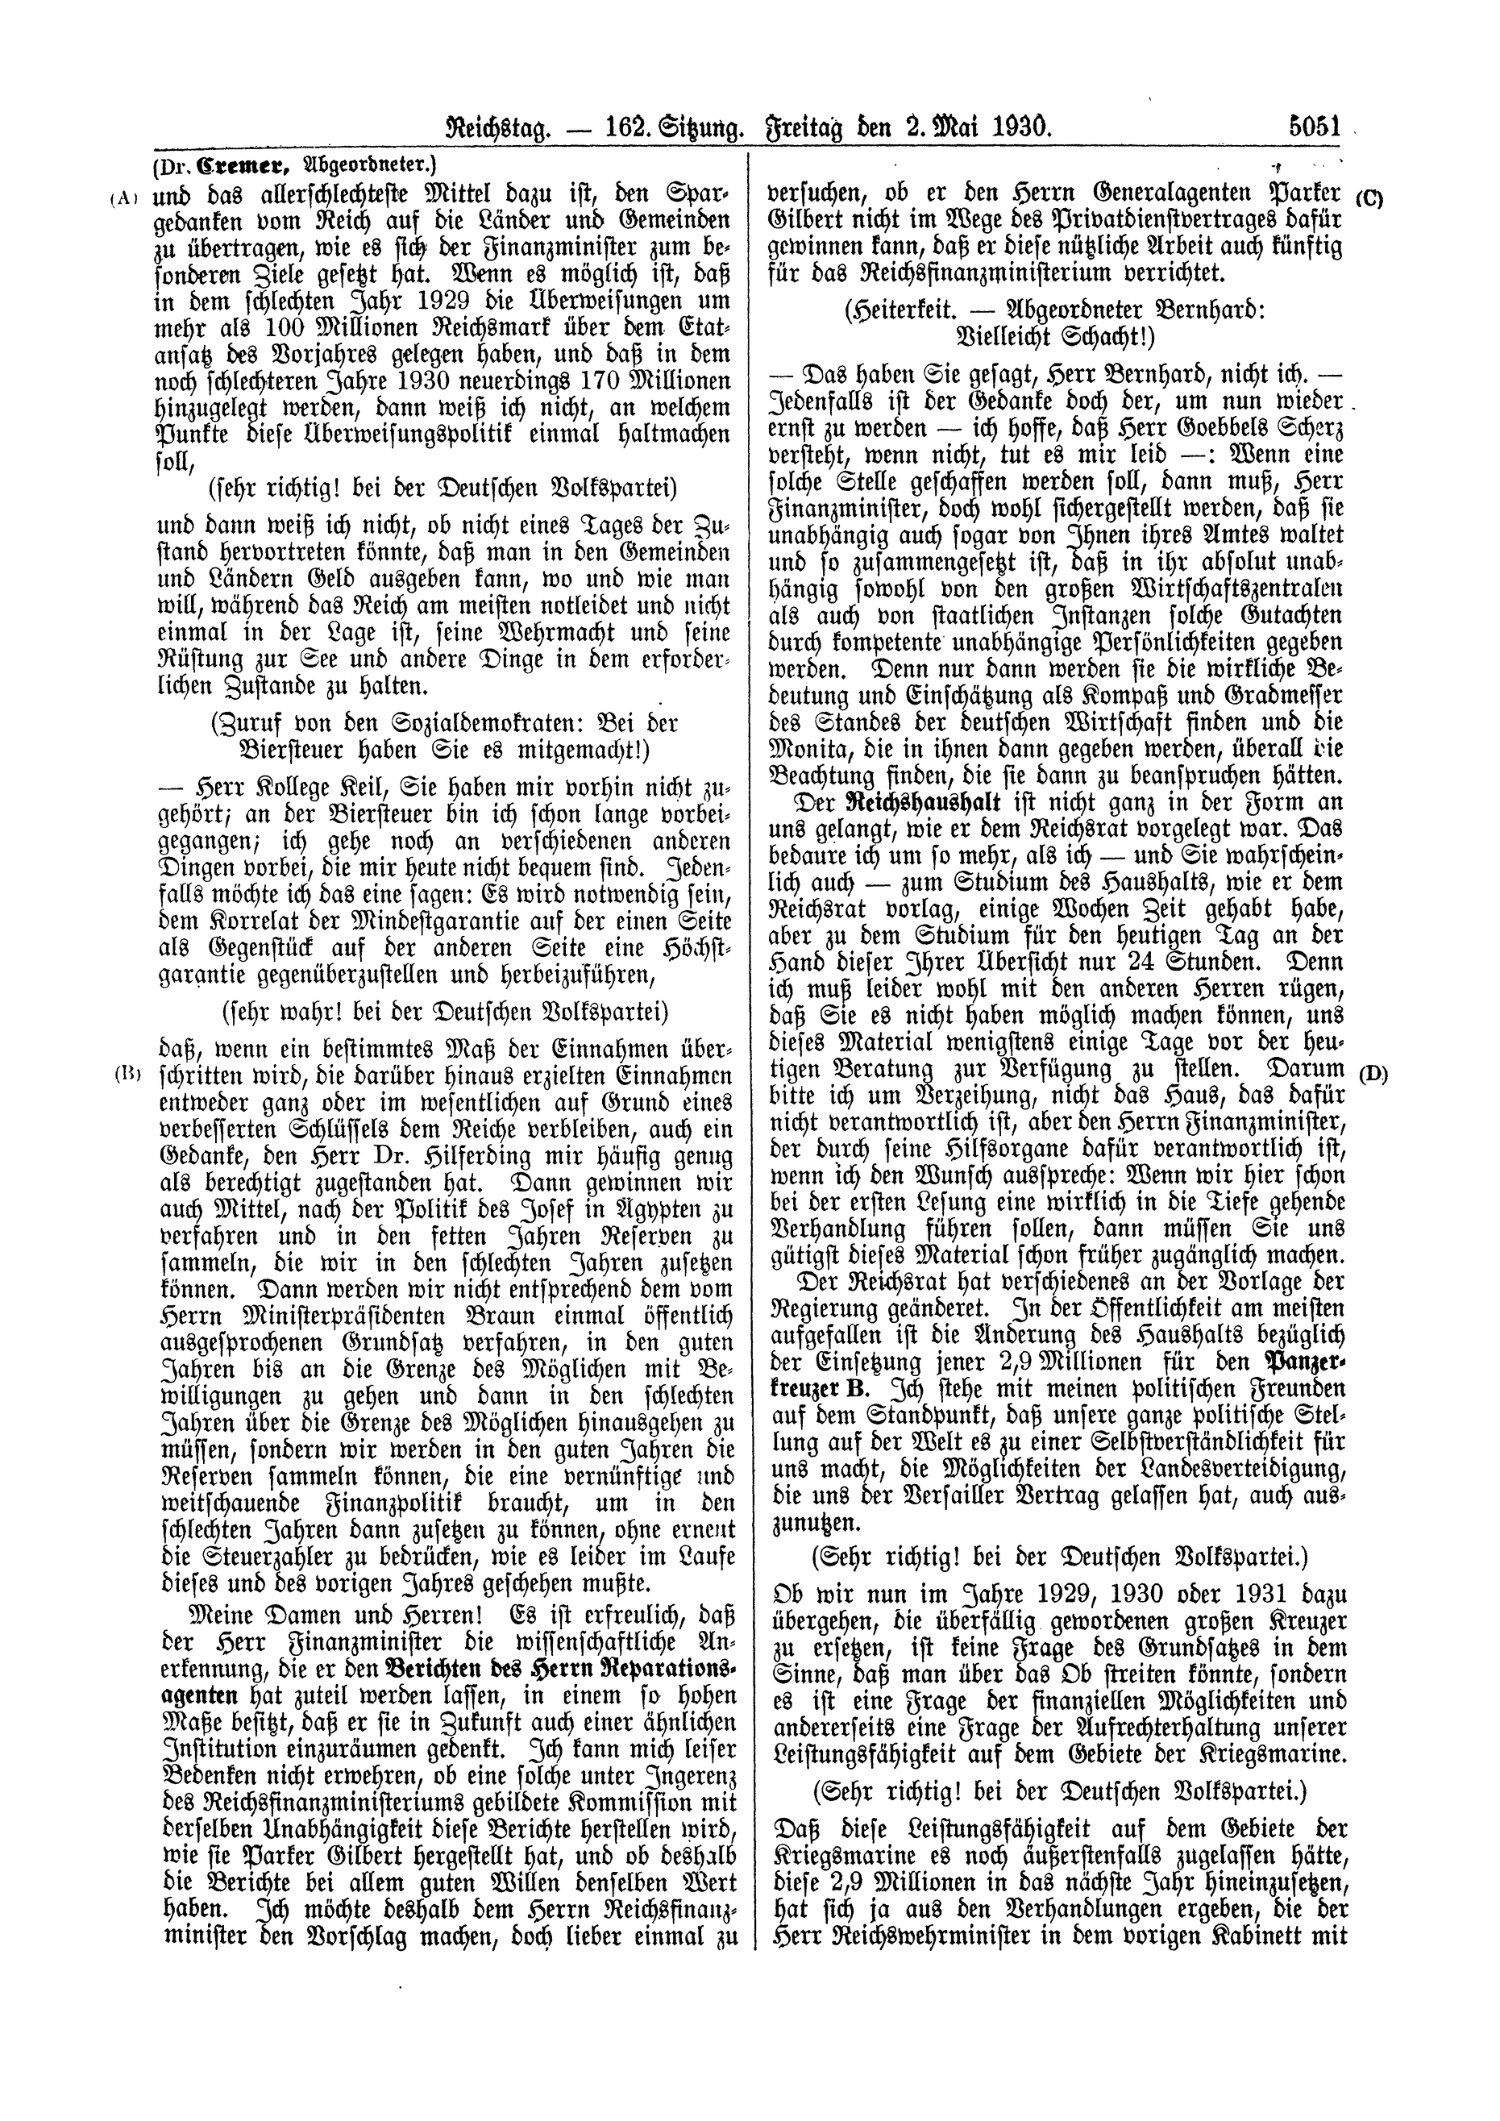 Scan of page 5051